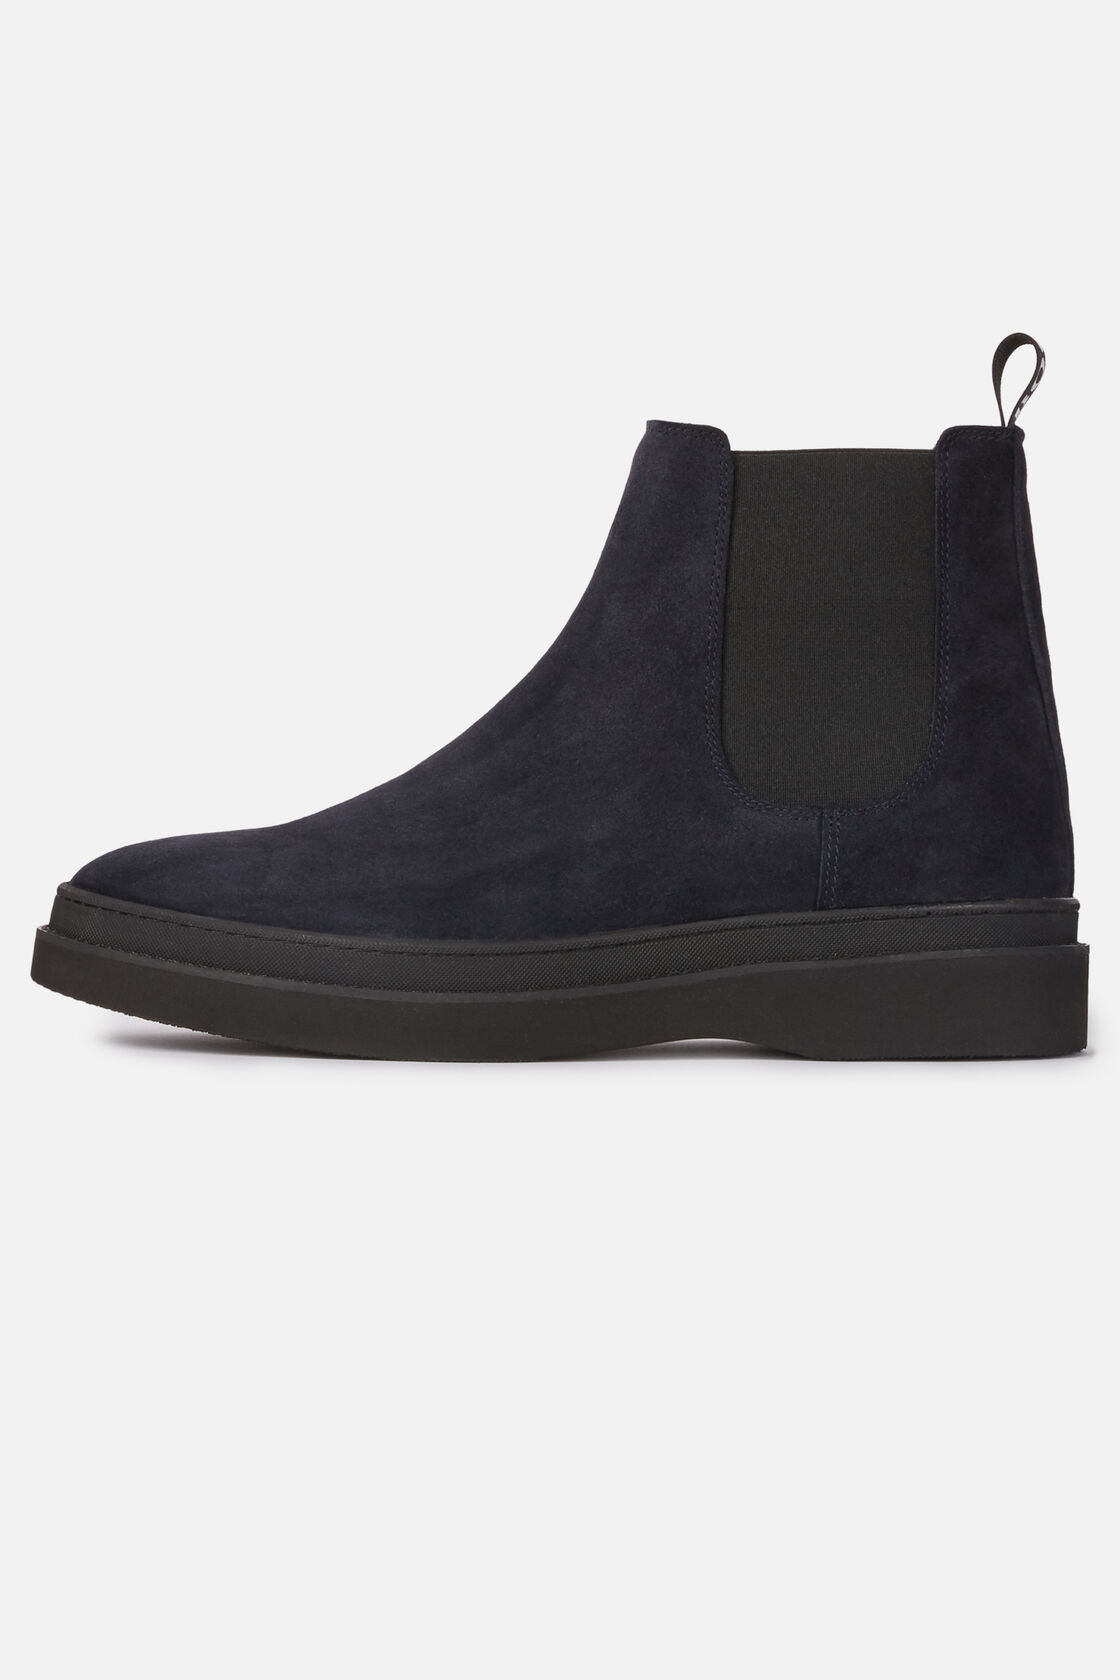 Suede Leather Ankle Boots, , hi-res